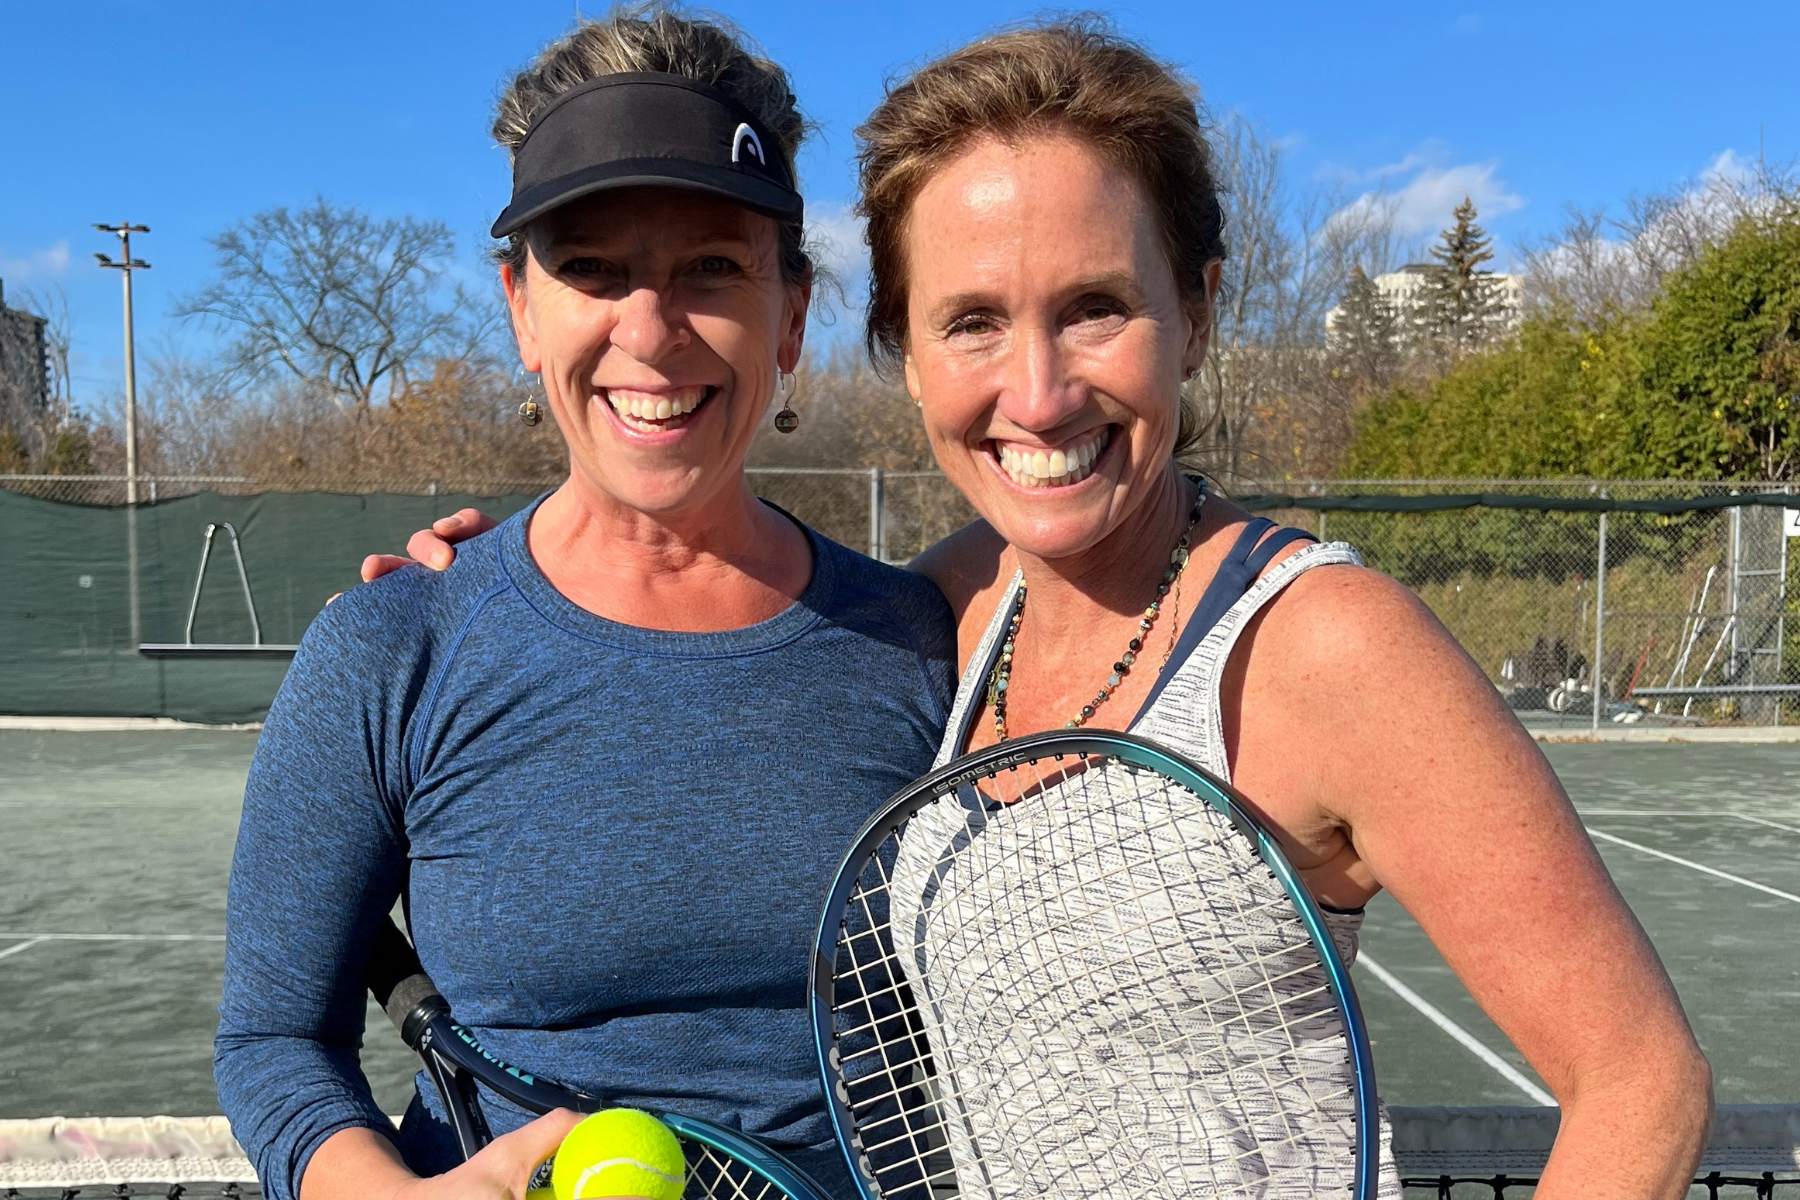 two women with summer tennis pass enjoying tennis on outdoor clay court in ottawa